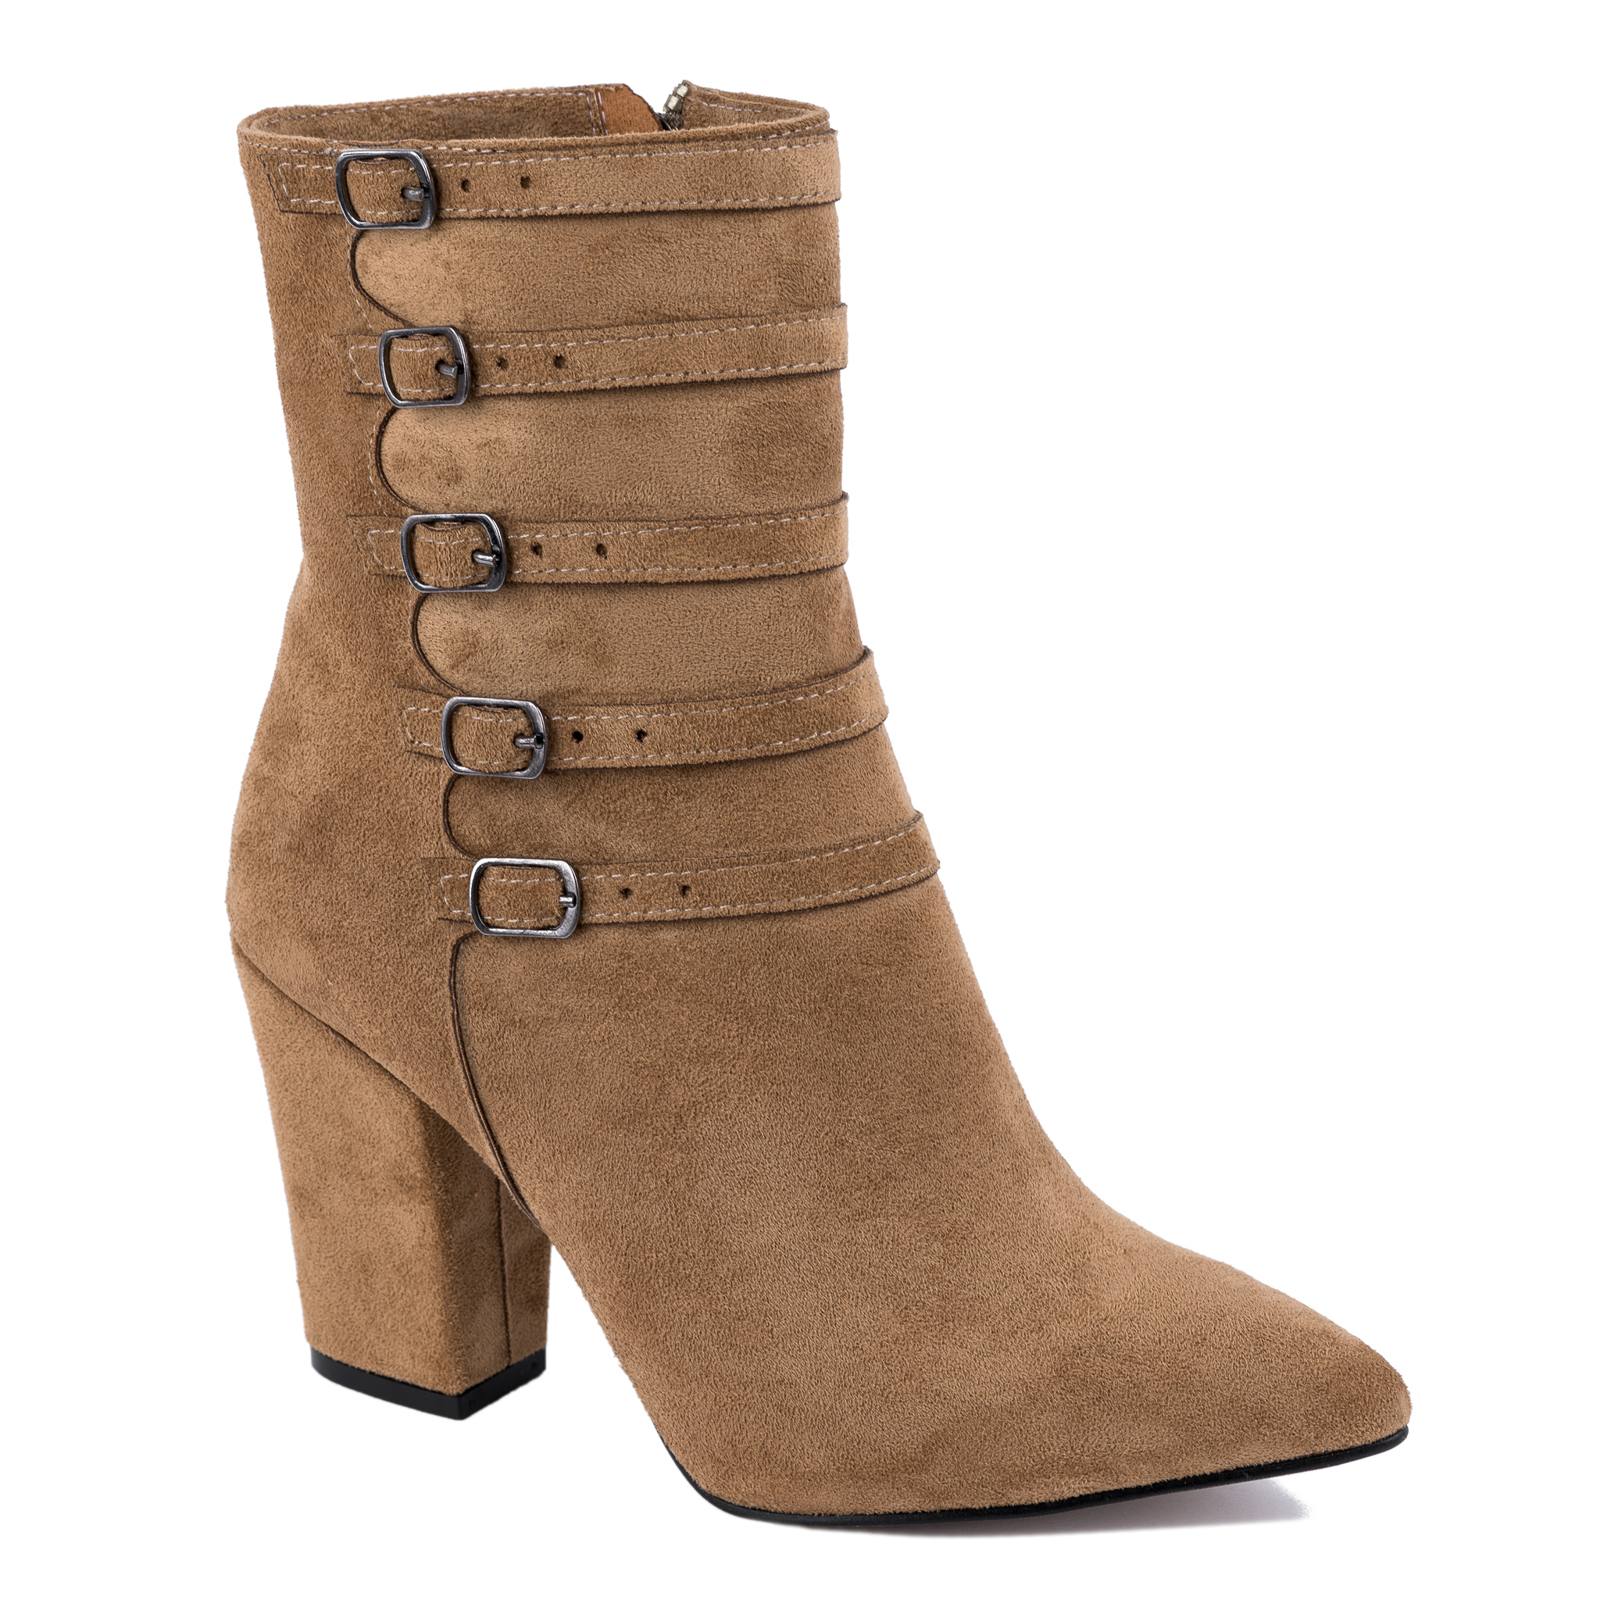 VELOUR ANKLE BOOTS WITH BELTS AND BLOCK HEEL - BEIGE